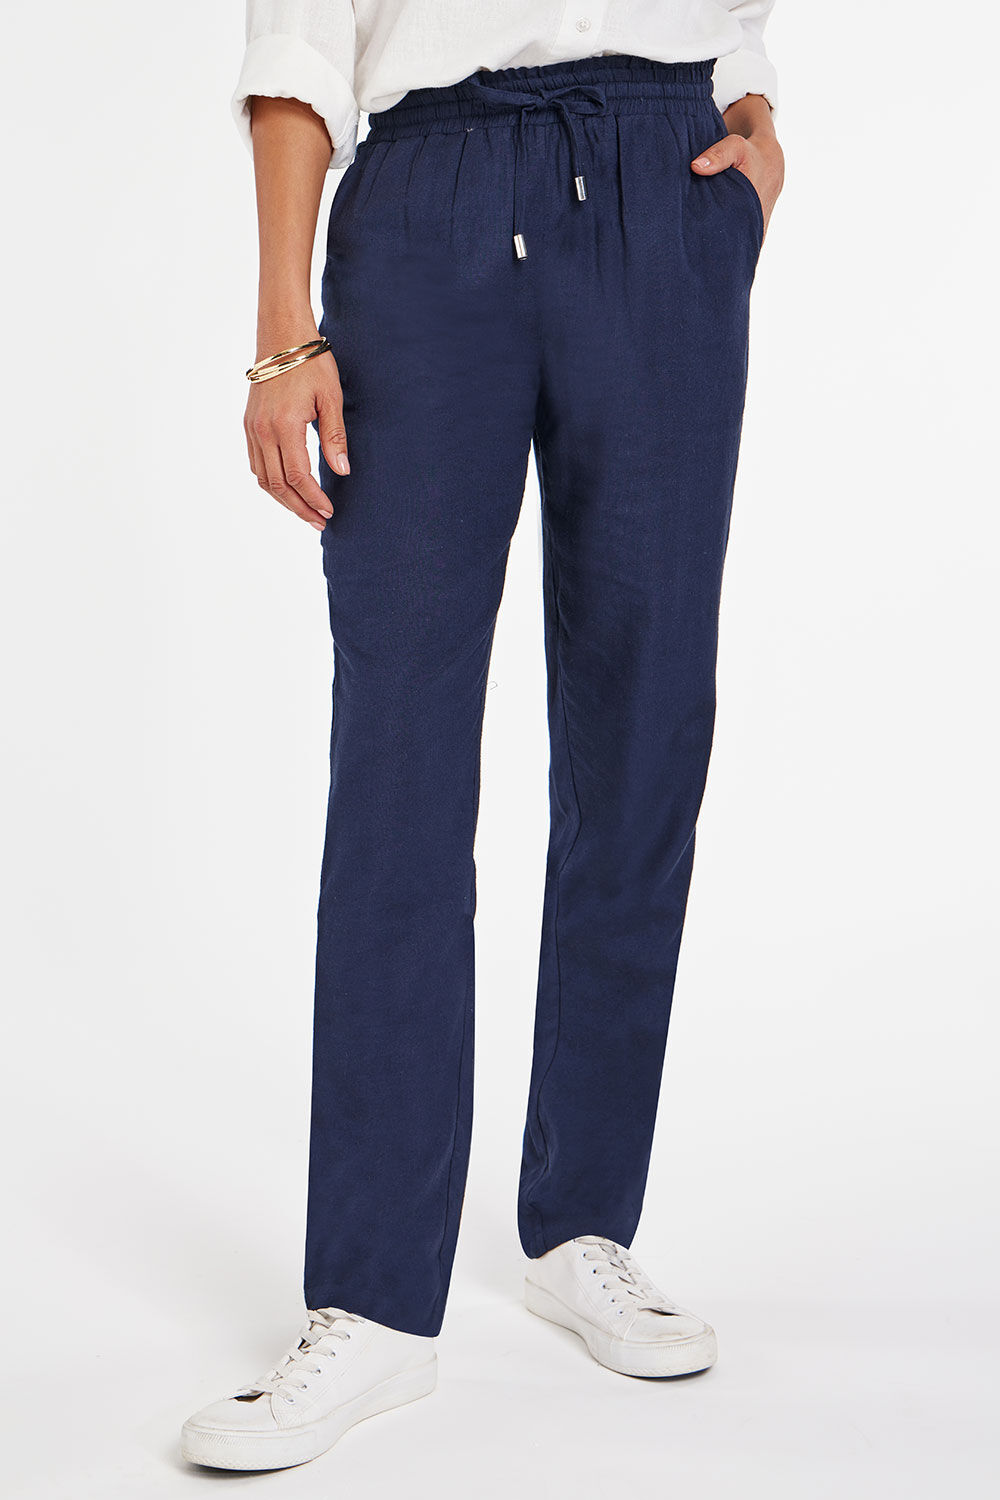 Bonmarche Navy Paperbag Tie Waist Tapered Linen Trousers, Size: 12